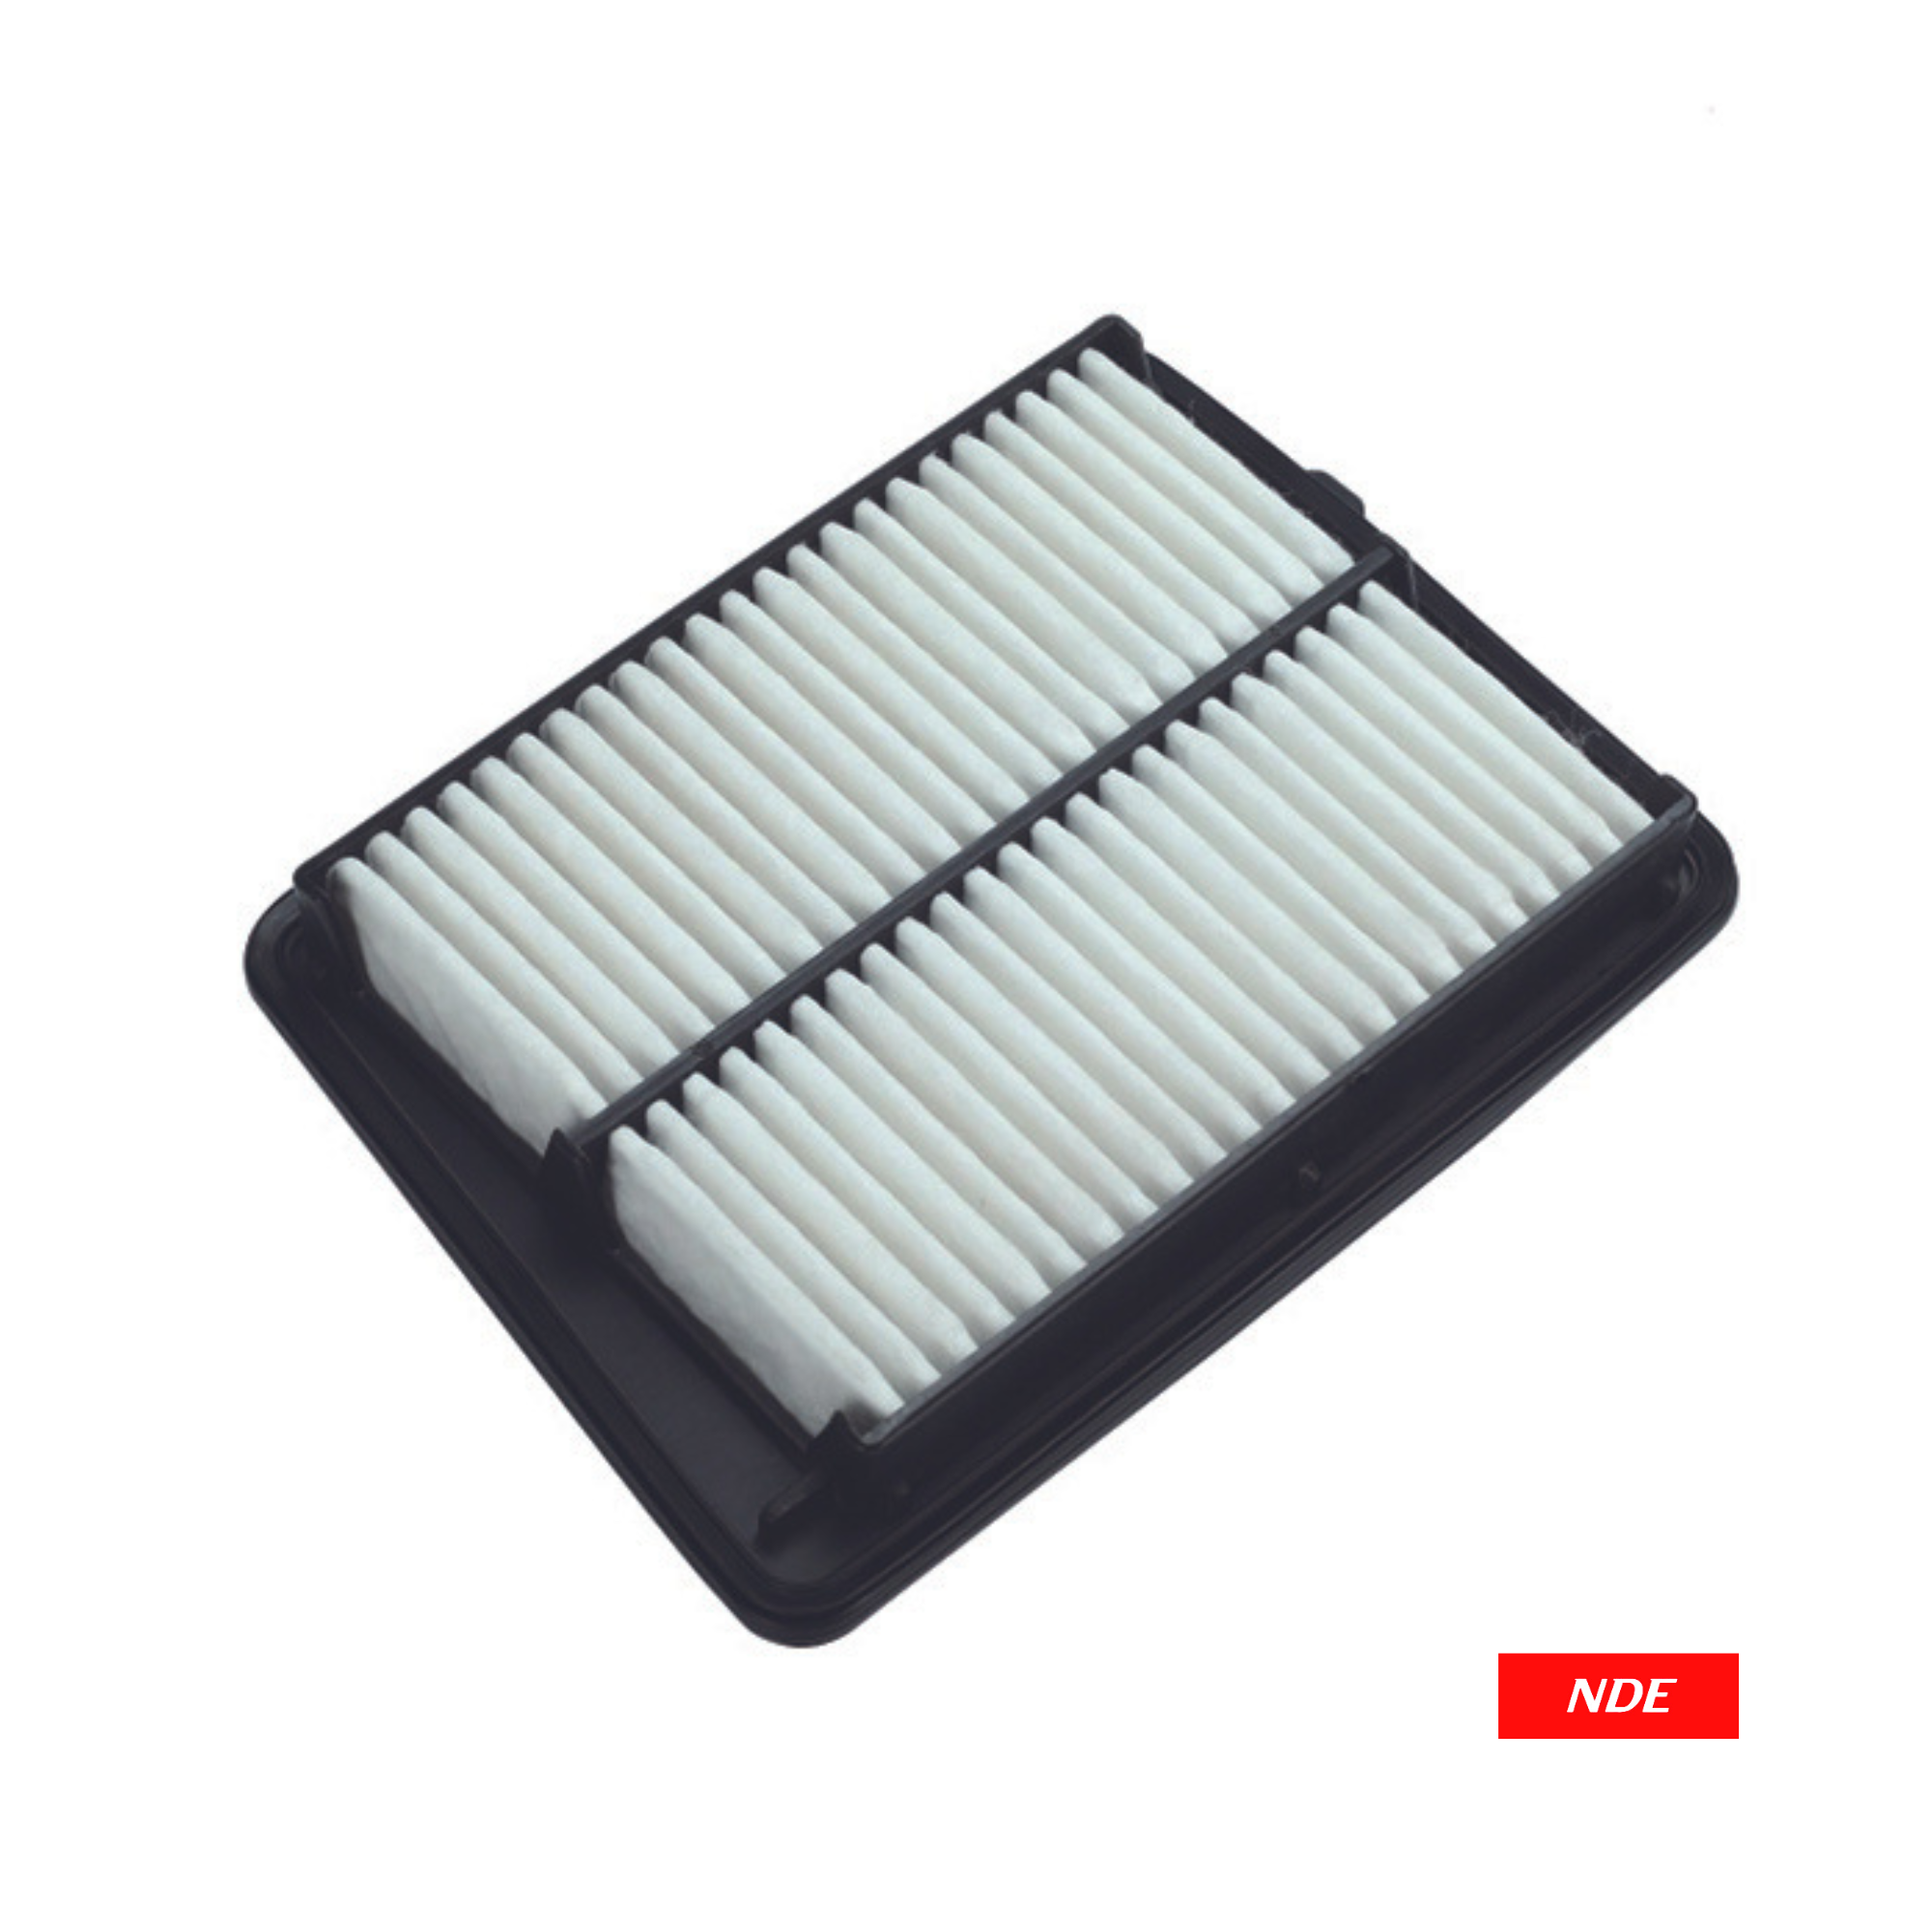 AIR FILTER FOR DAIHATSU HIJET (IMPORTED)